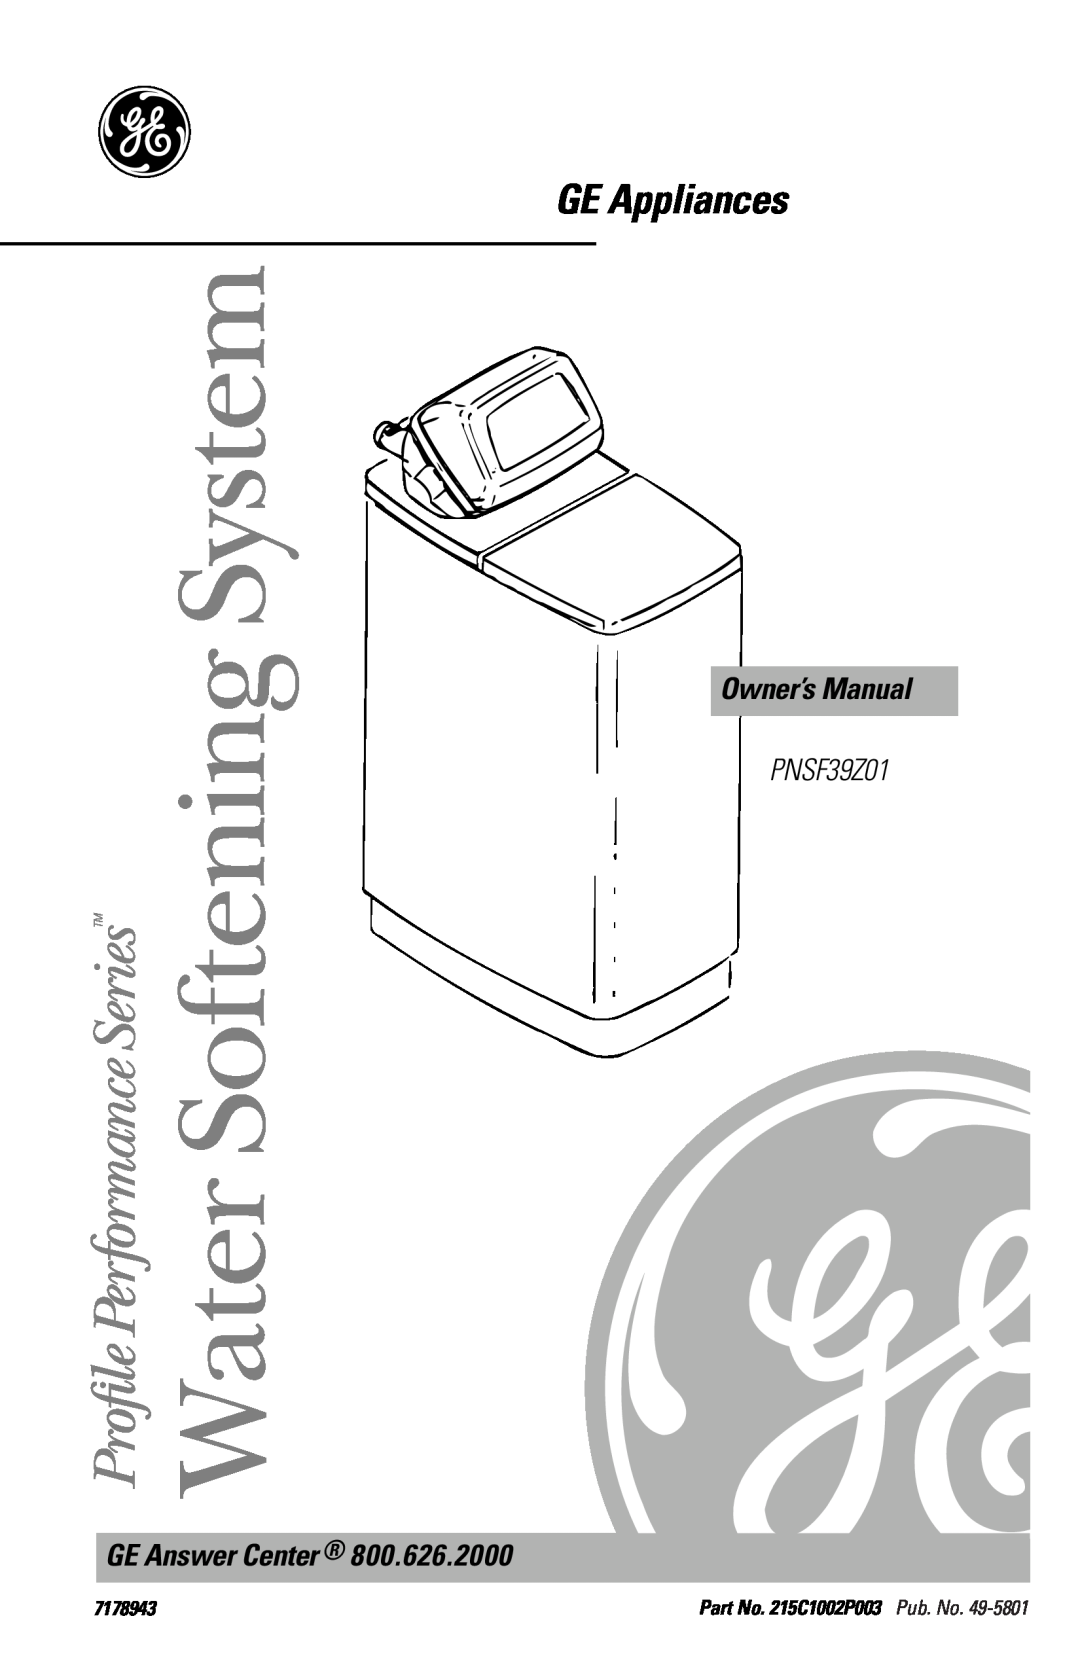 GE PNSF39Z01 owner manual GE Appliances, Owner’s Manual, GE Answer Center, Water Softening System, 7178943 